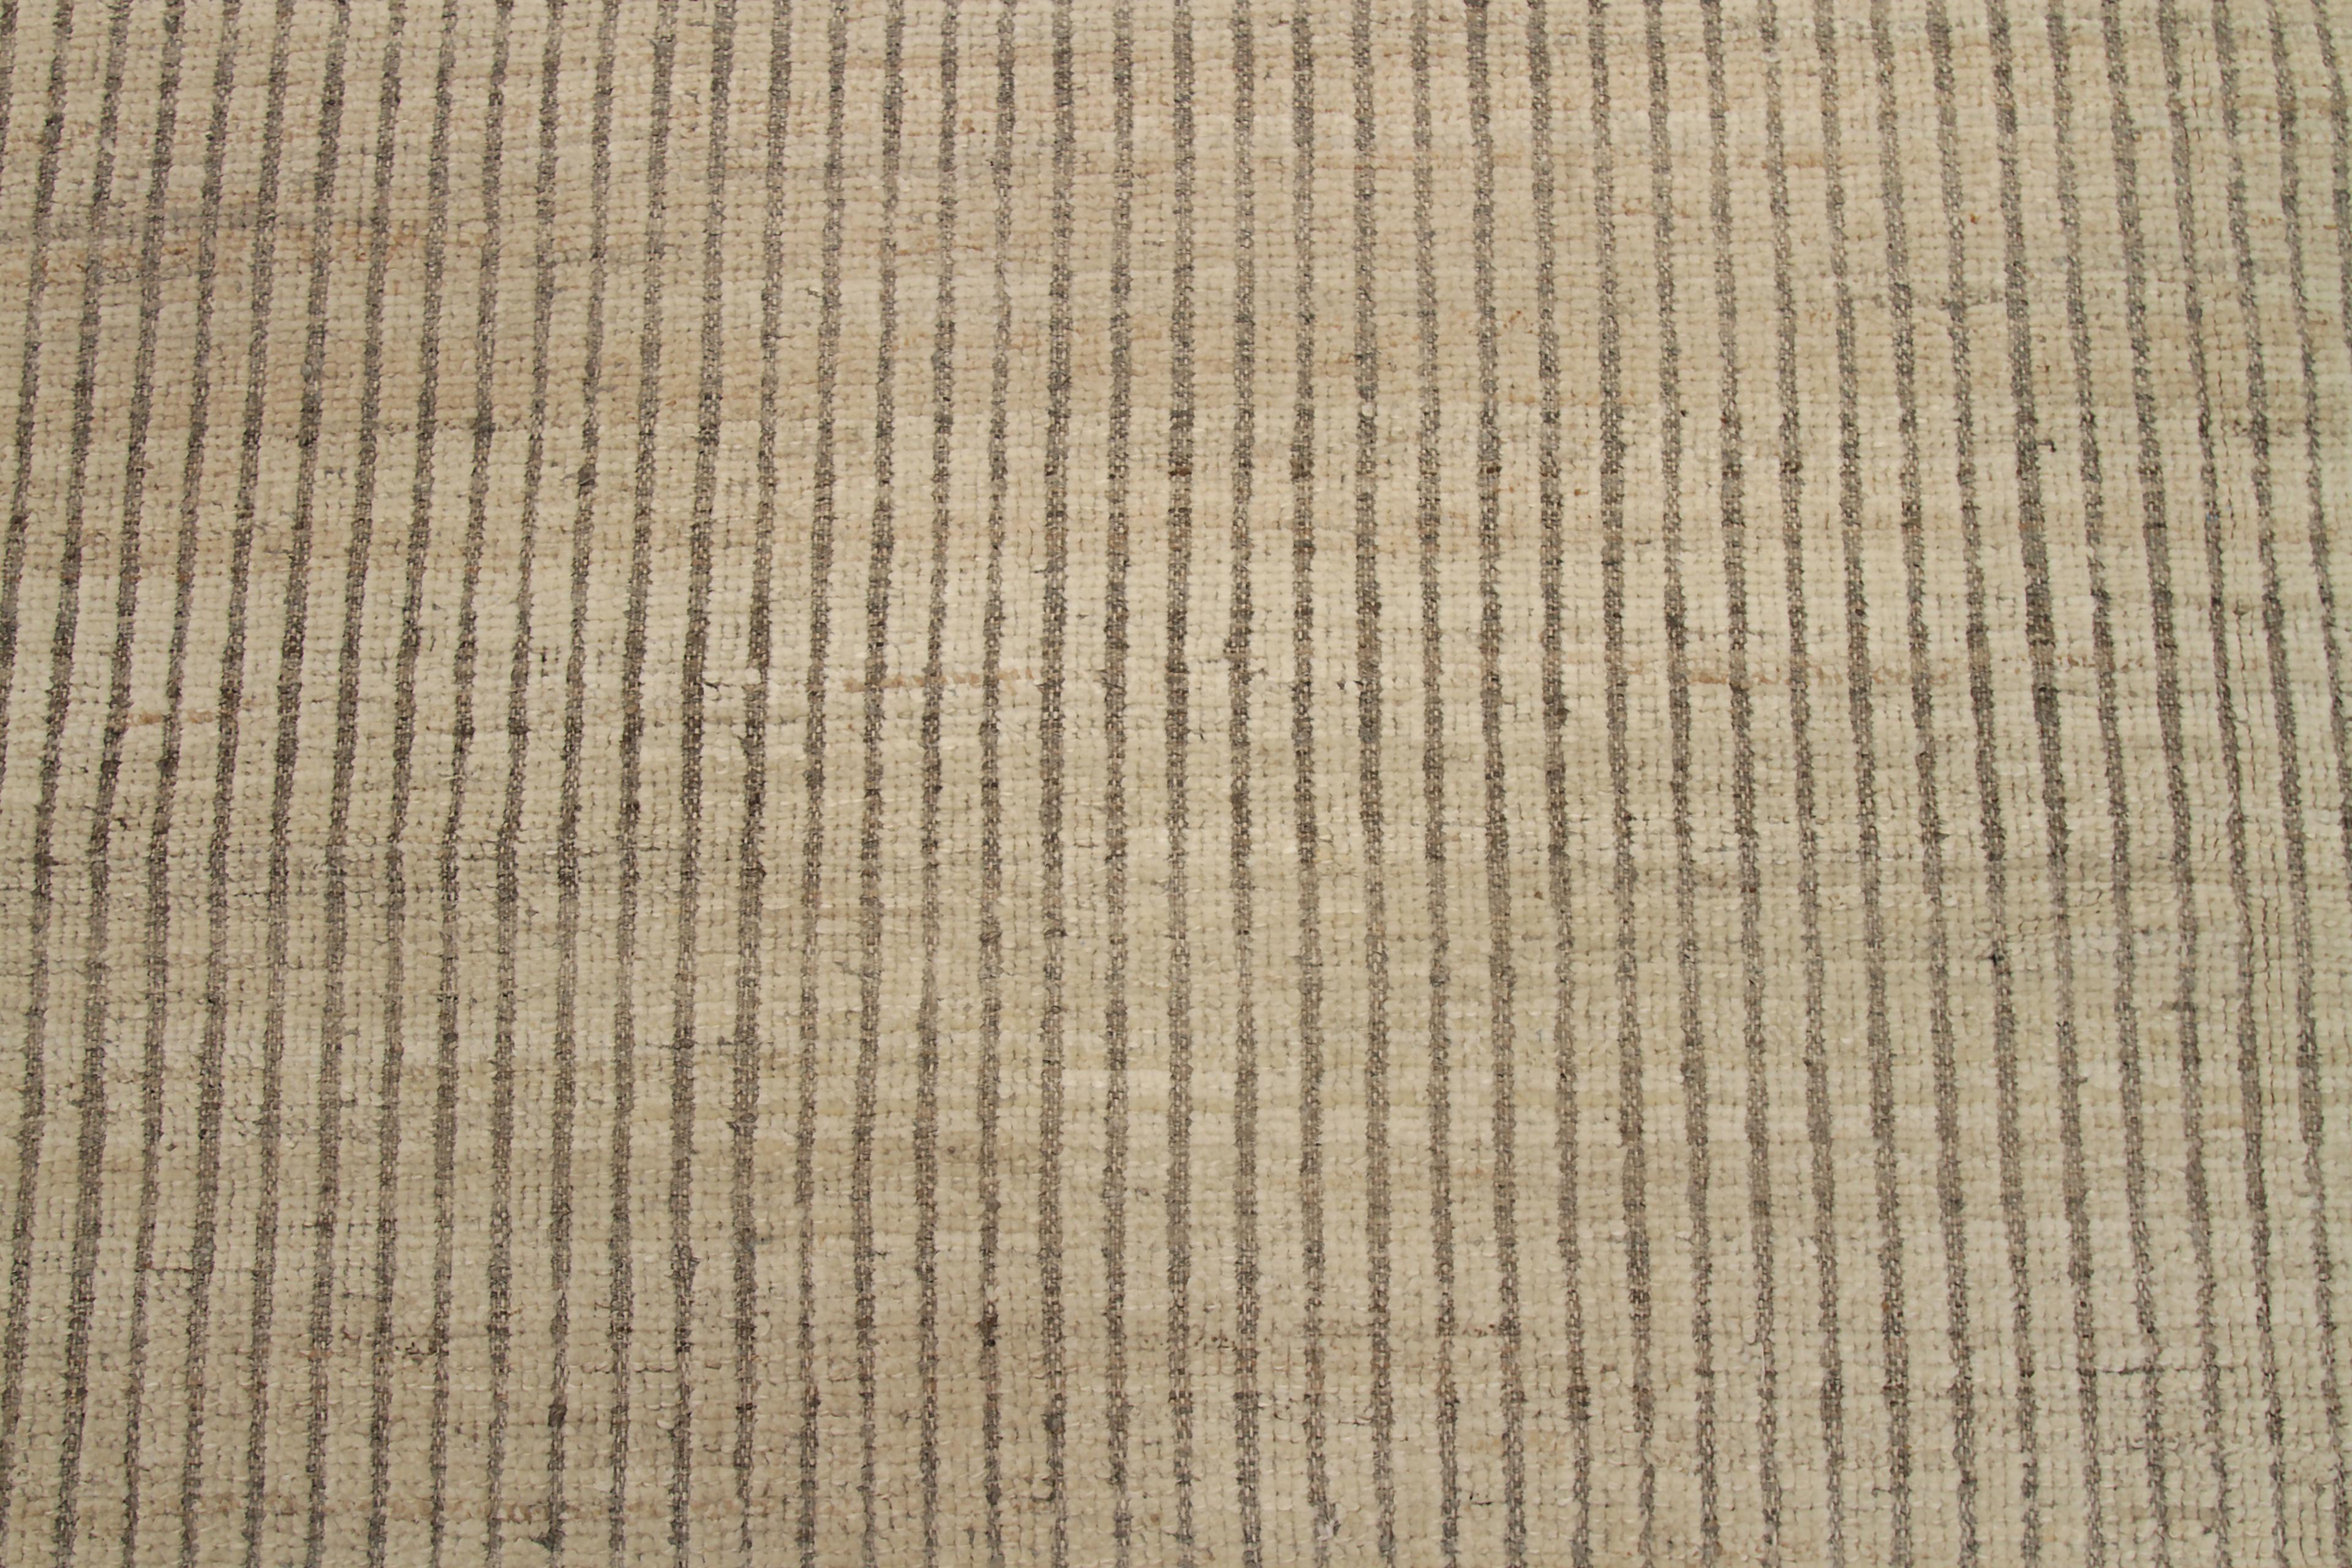 Elegant Soft Neutral Modern Distressed Rug, Country of Origin: Afghanistan, Circa Date: Modern. Size: 9 ft 9 in x 12 ft (2.97 m x 3.66 m)